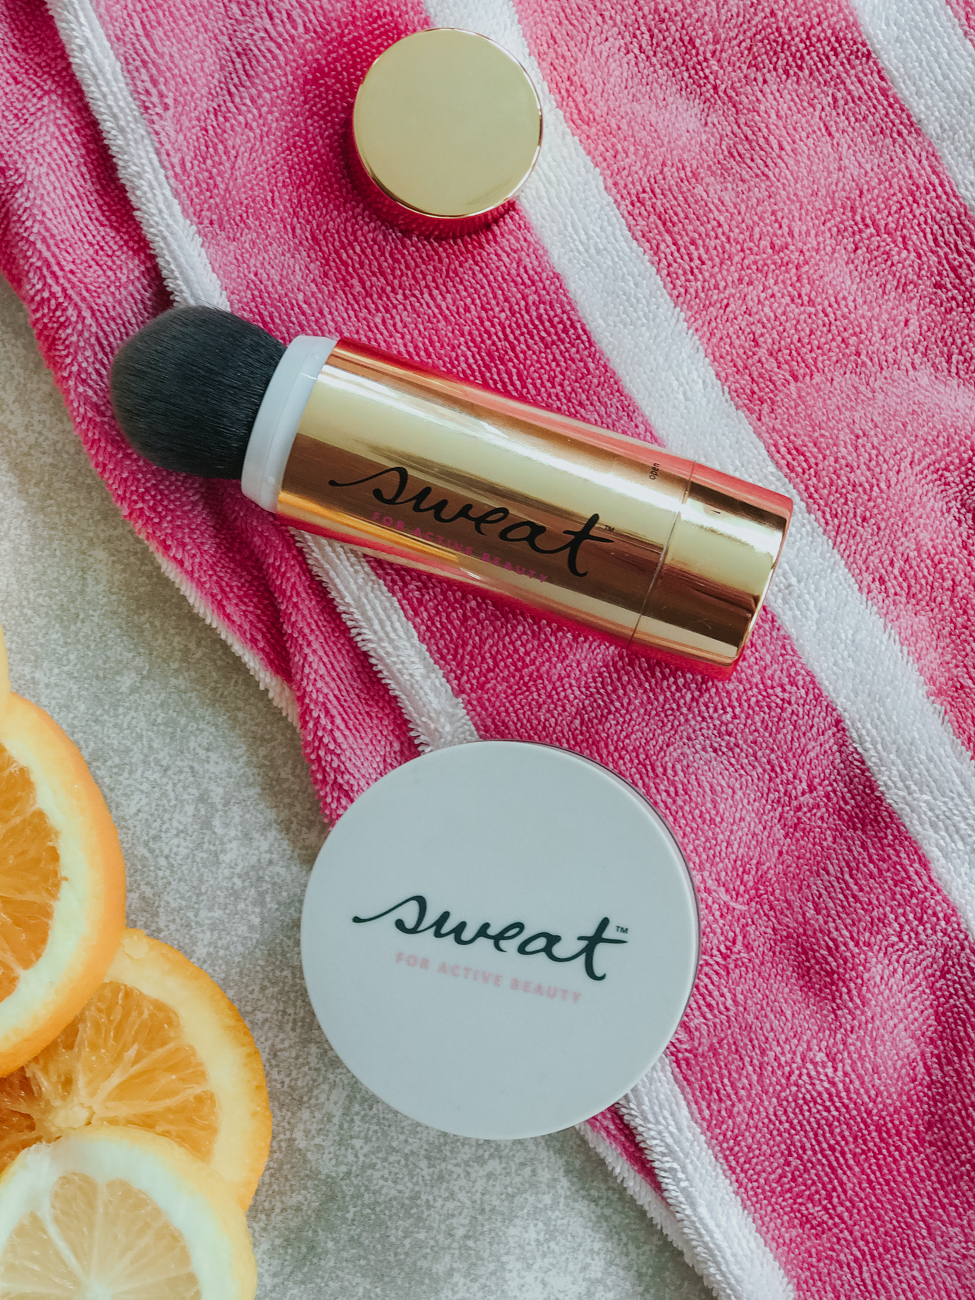 Sweat Mineral Foundation Powder Jar SPF 30 (developed by athletes) is sweat proof makeup that will stay on your face from barre to brunch 